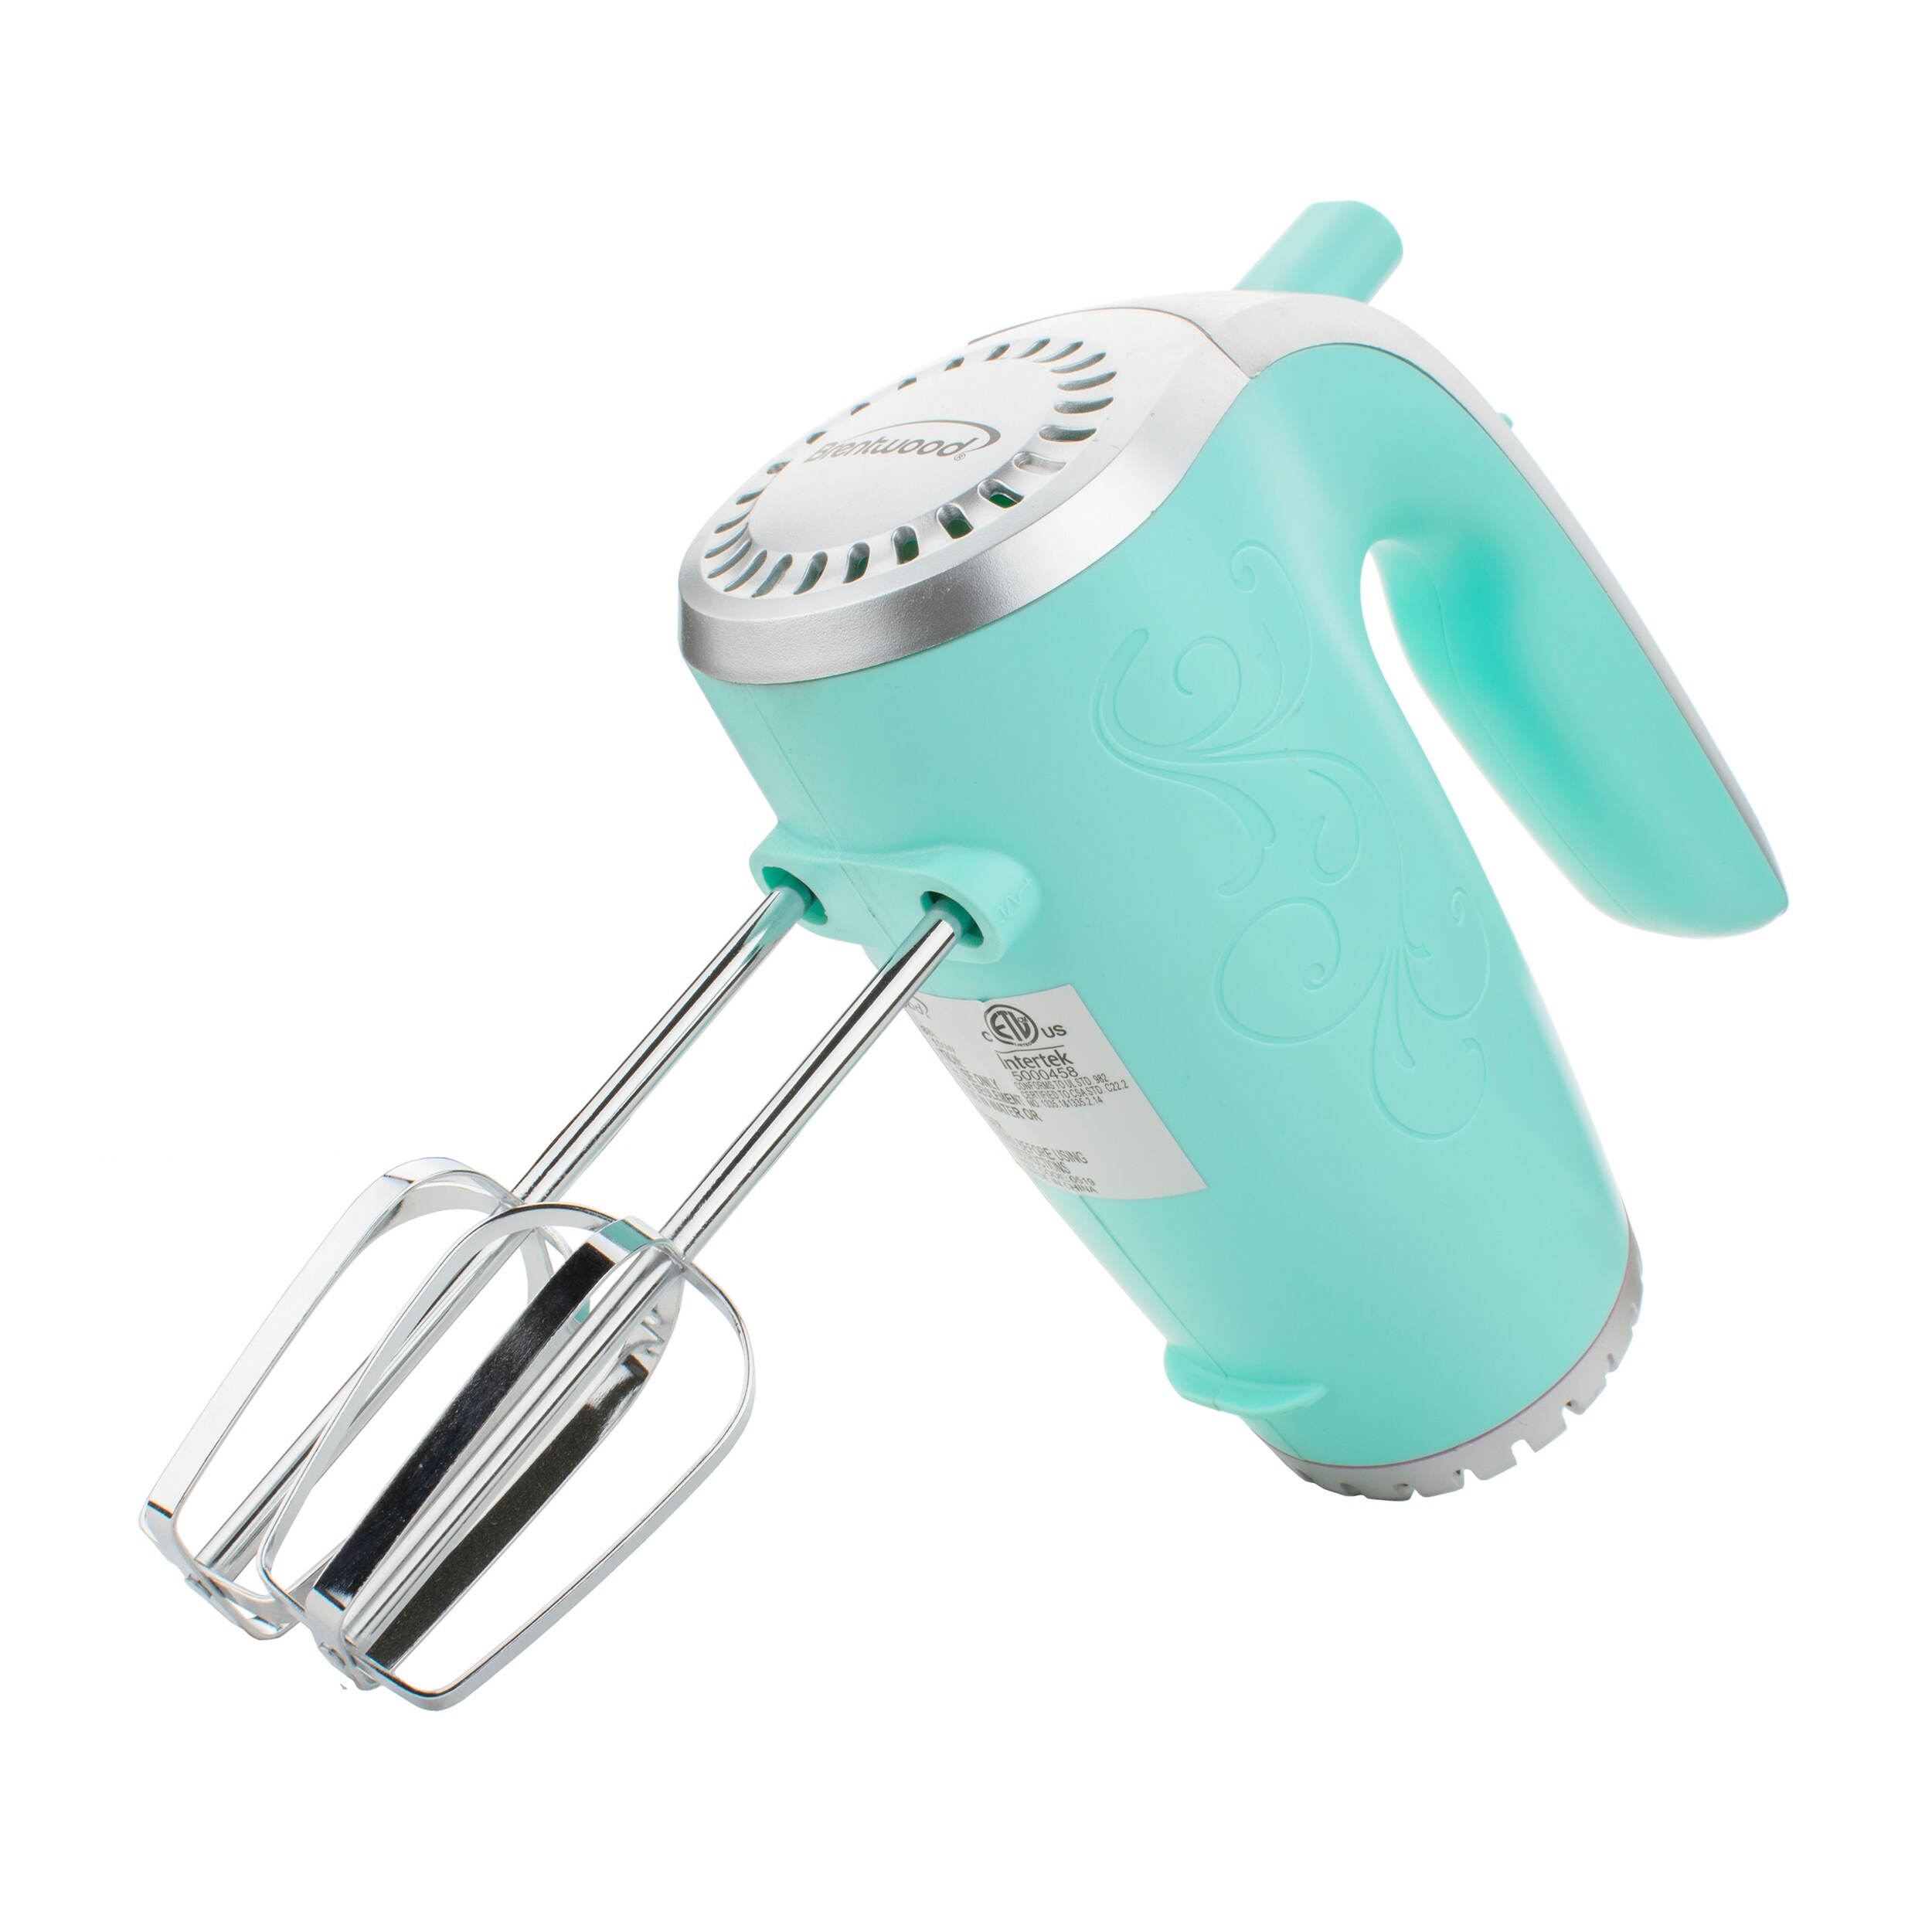 https://ak1.ostkcdn.com/images/products/is/images/direct/02033c7cd3fbfaa3f1d1cc7e4715580a8b4e817f/5-Speed-150-Watt-Electric-Hand-Mixer-in-Turquoise.jpg